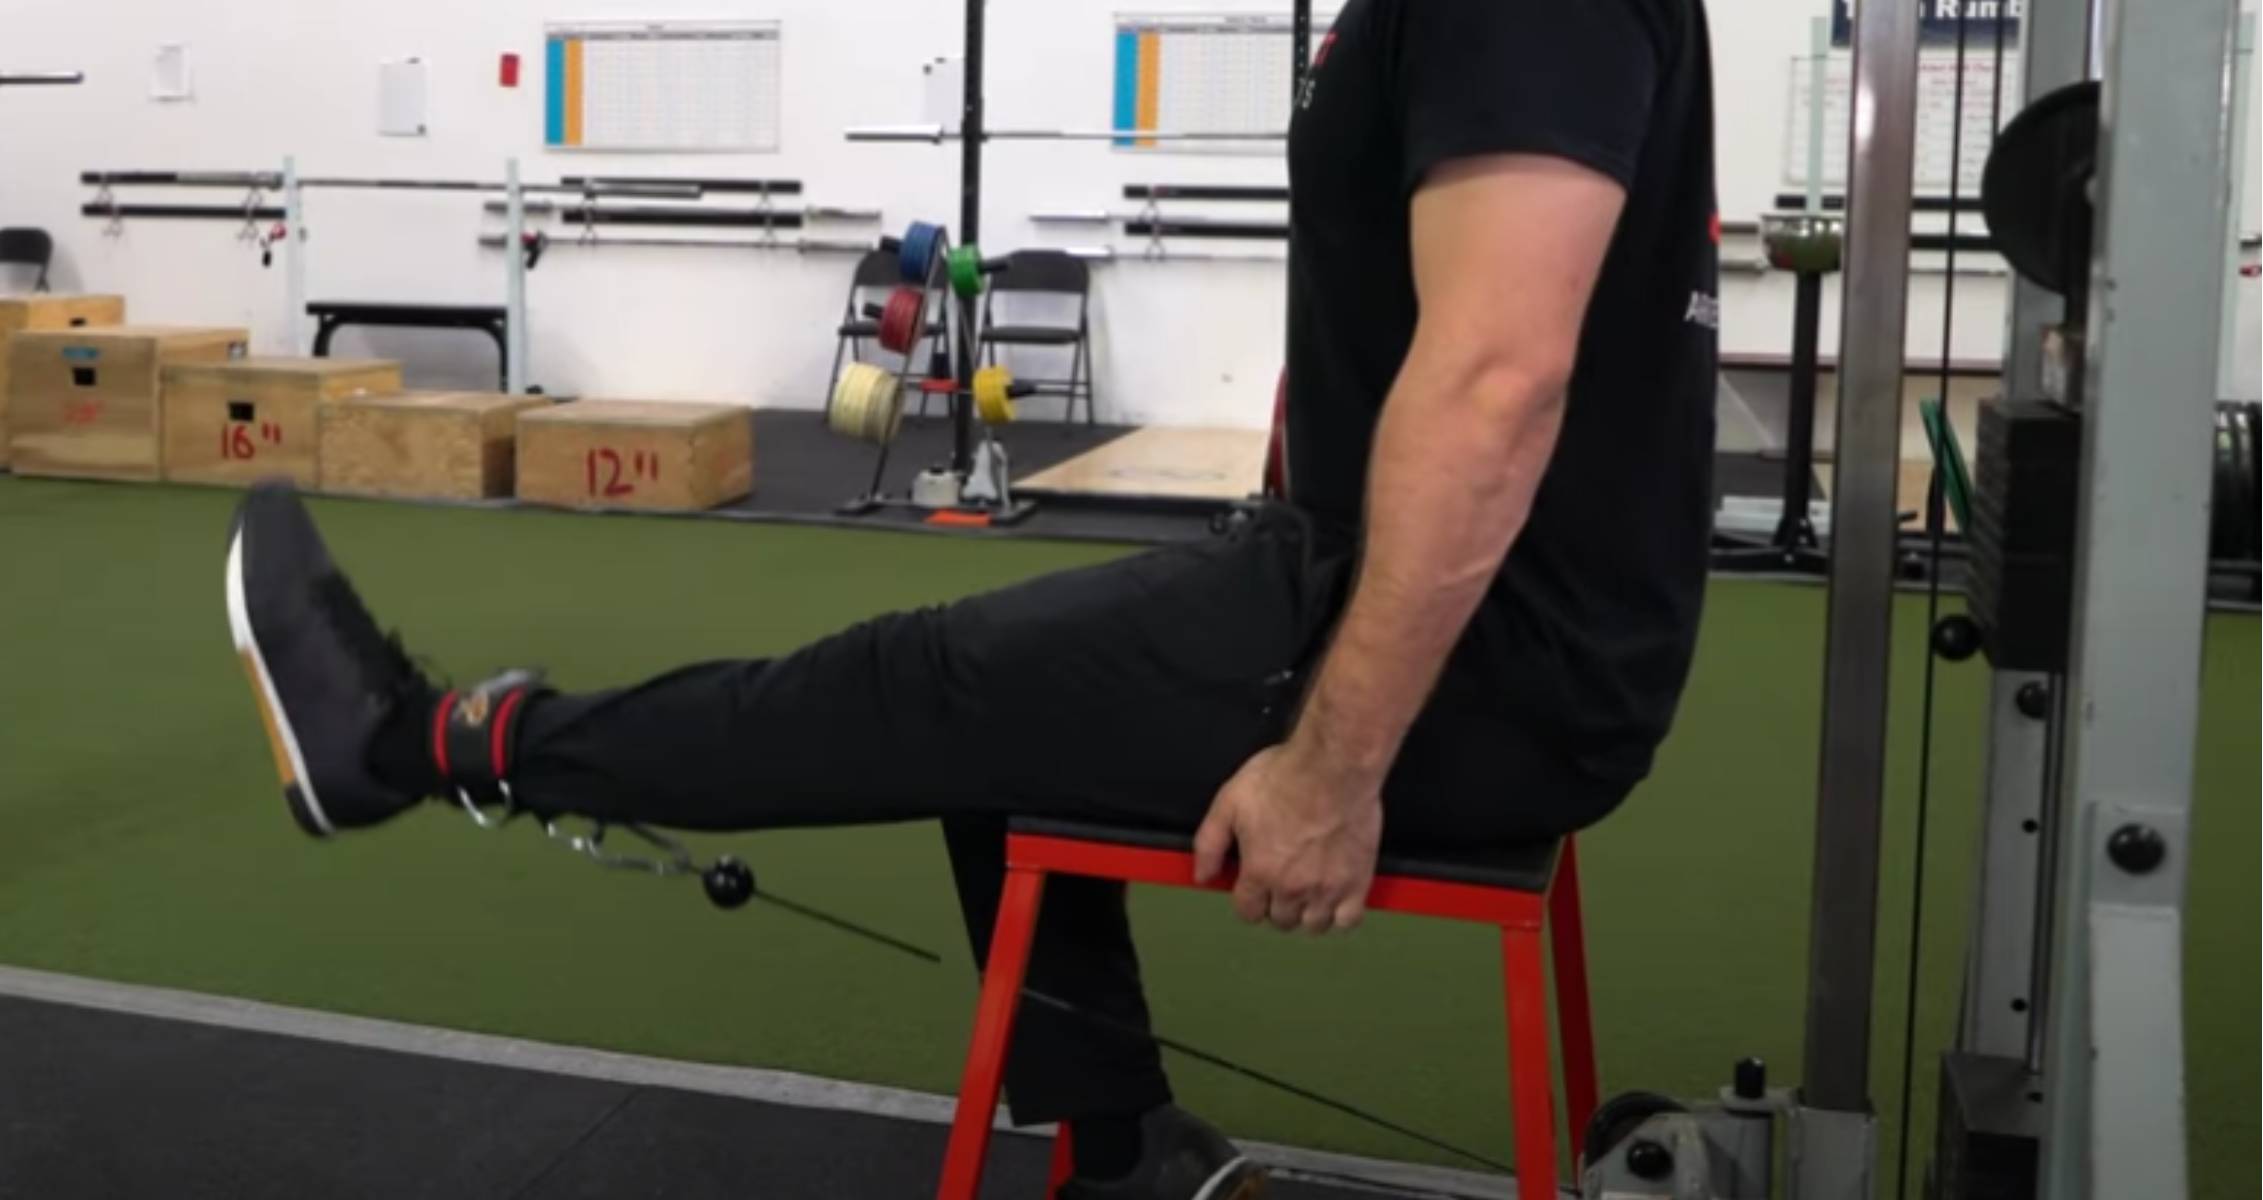 Cable Leg Extension Exercise Guide — How to, Benefits, and More